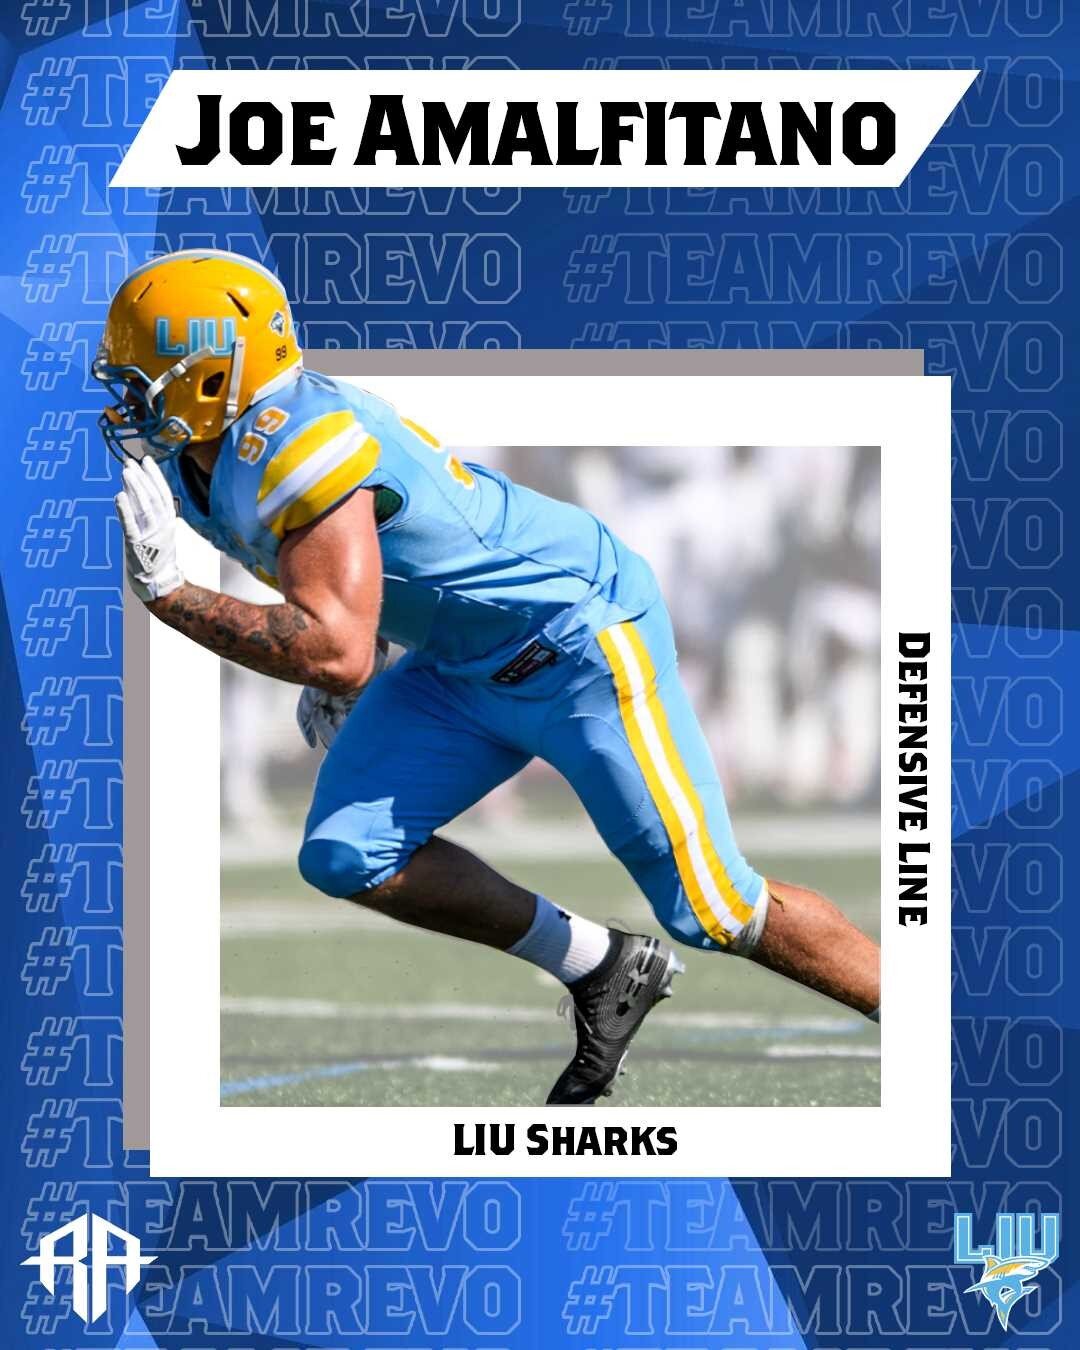 @joeamalfitanoo is looking to build off his strong First-Team All-NEC season last year 😤

Amalfitano was a force in the shortened Spring 2021 season, being a guy that demanded double teams to slow up his constant pressure on the opposing QBs. Joe ha